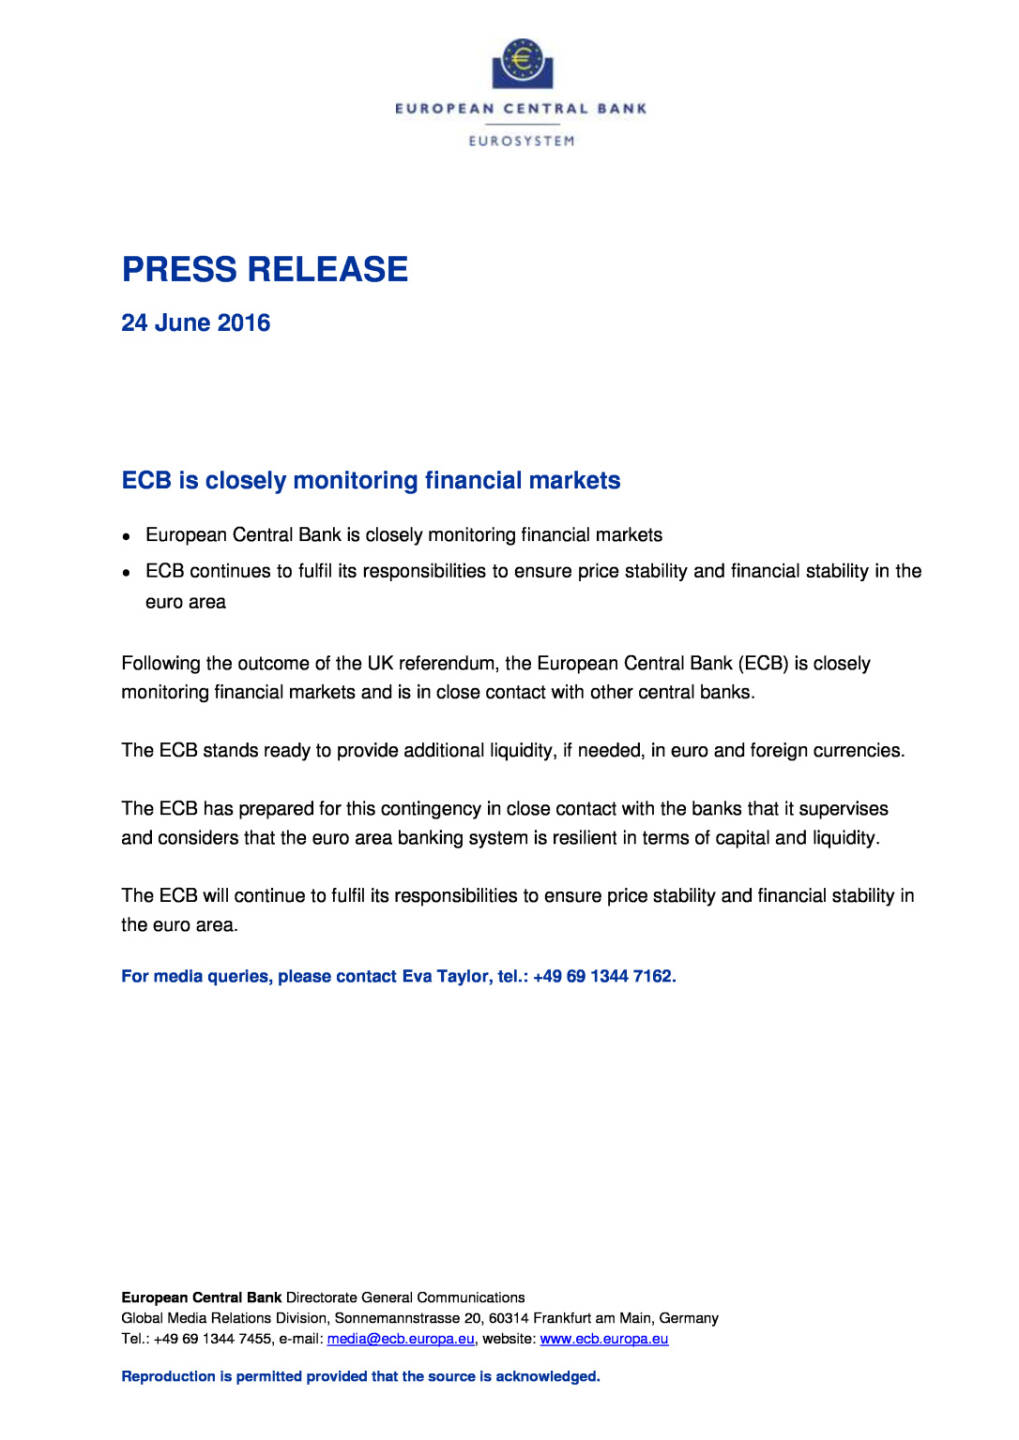 ECB is closely monitoring financial markets, Seite 1/1, komplettes Dokument unter http://boerse-social.com/static/uploads/file_1273_ecb_is_closely_monitoring_financial_markets.pdf